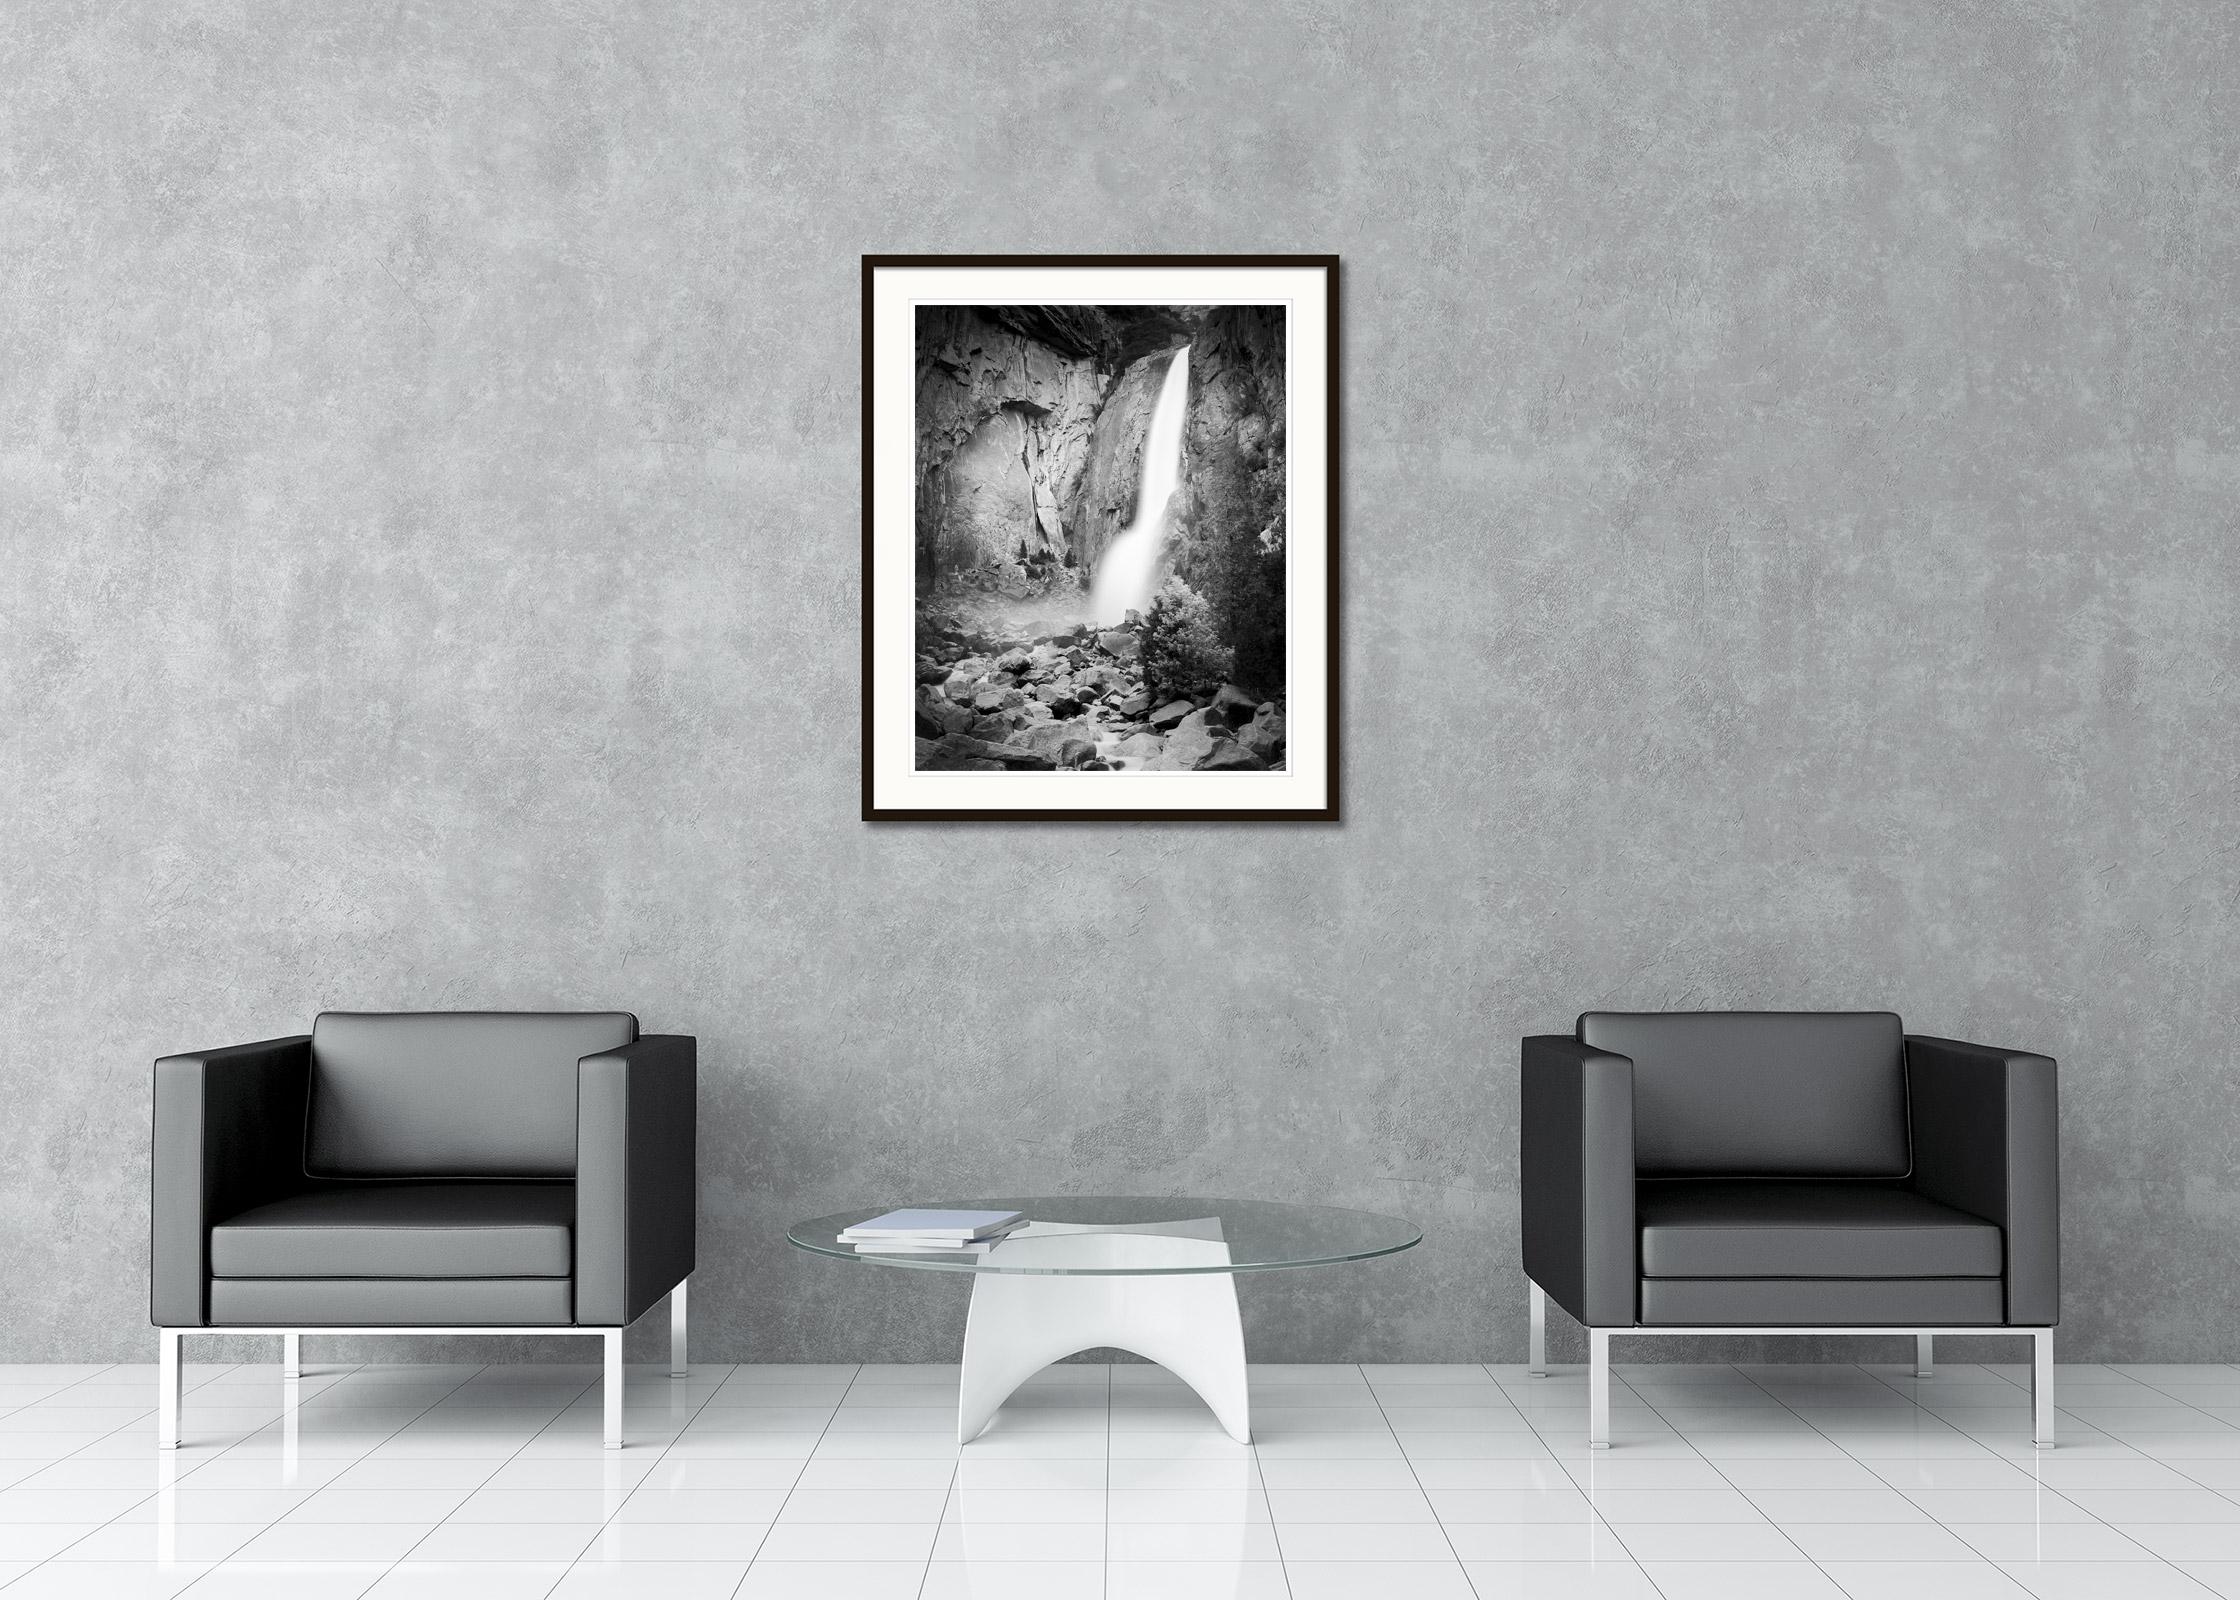 Black and white fine art long exposure waterscape - landscape photography. Archival pigment ink print, edition of 7. Signed, titled, dated and numbered by artist. Certificate of authenticity included. Printed with 4cm white border.
International